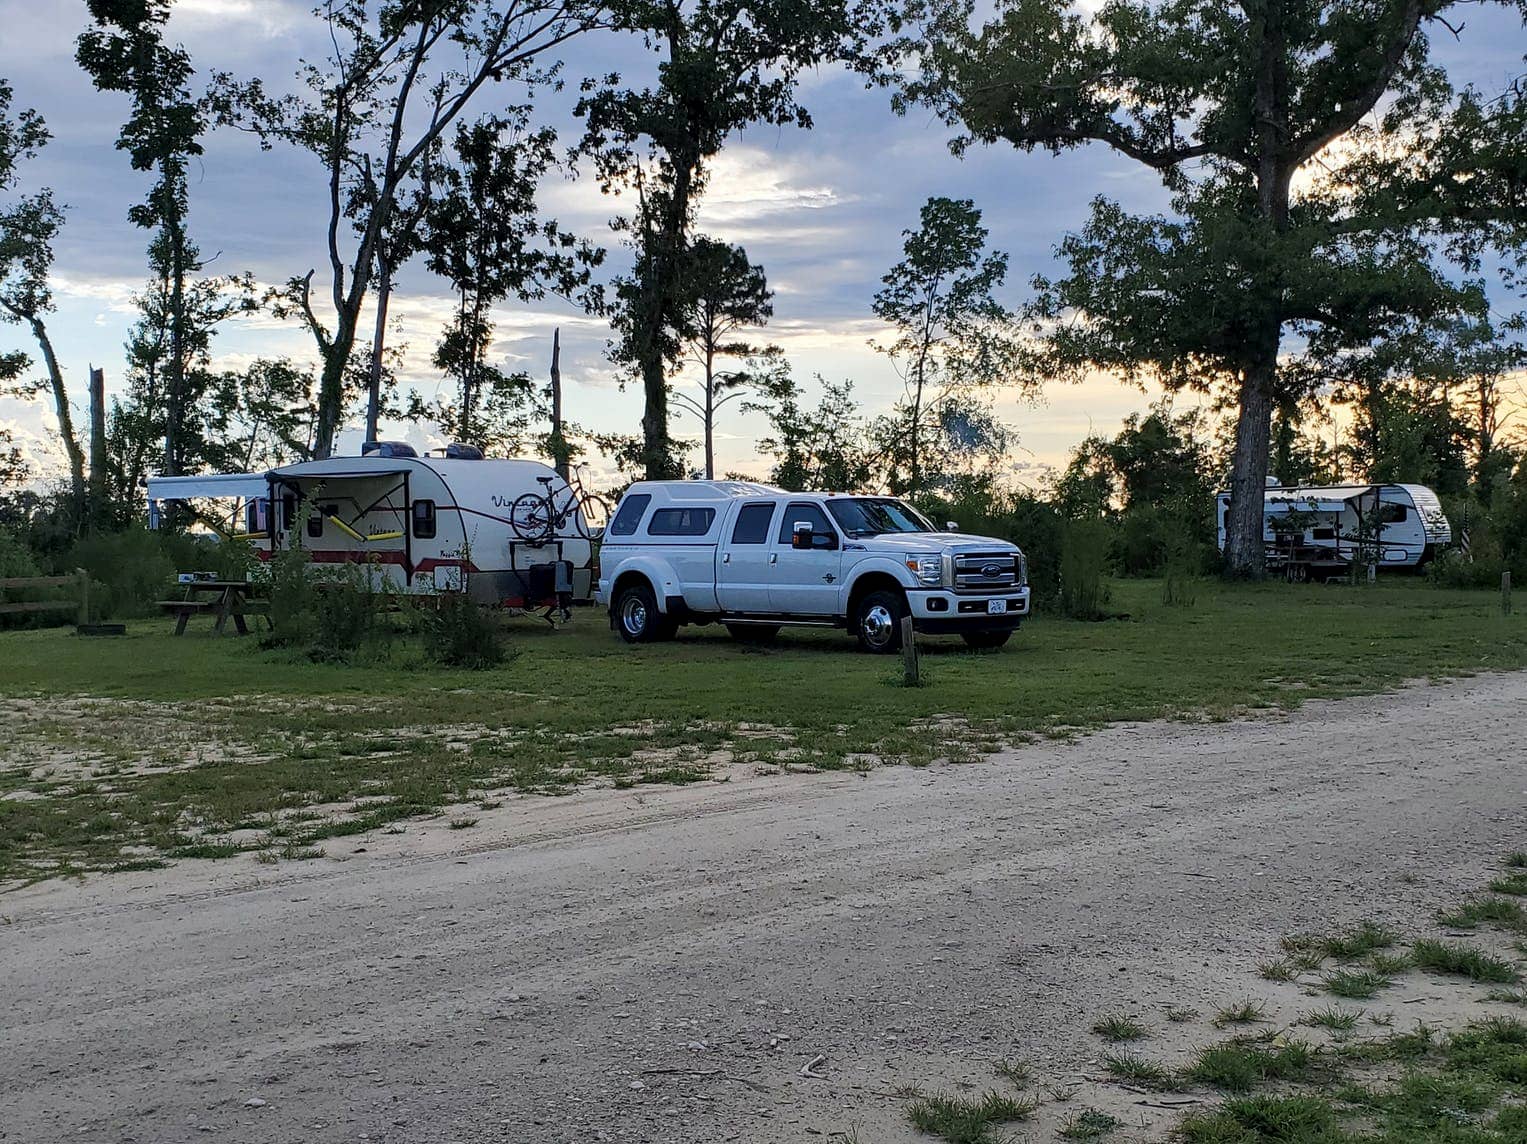 Pick up truck with RV trailer parked at campsite at Torreya State Park.